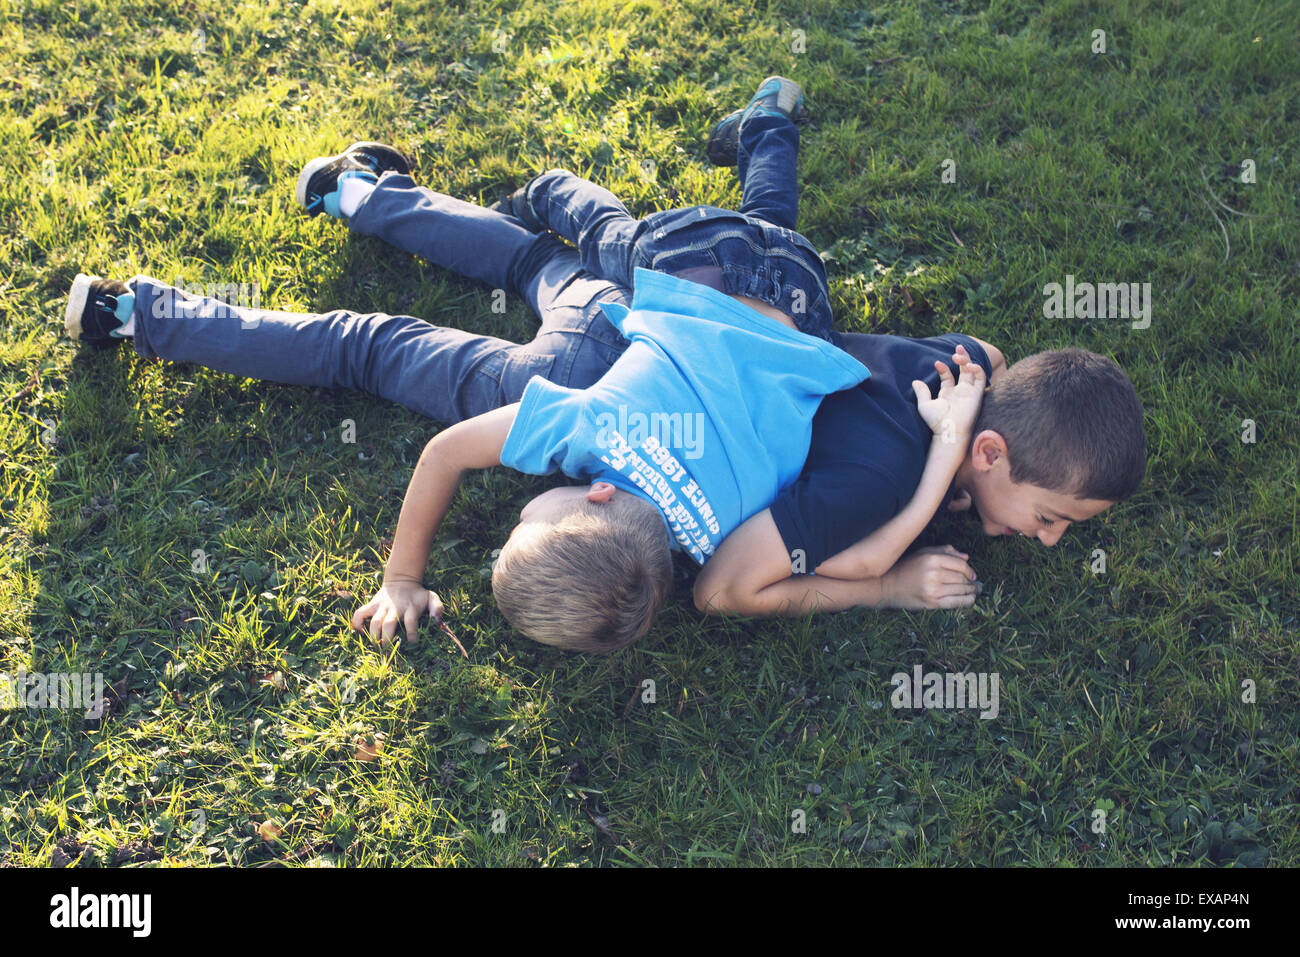 Young brothers playing together on lawn Stock Photo